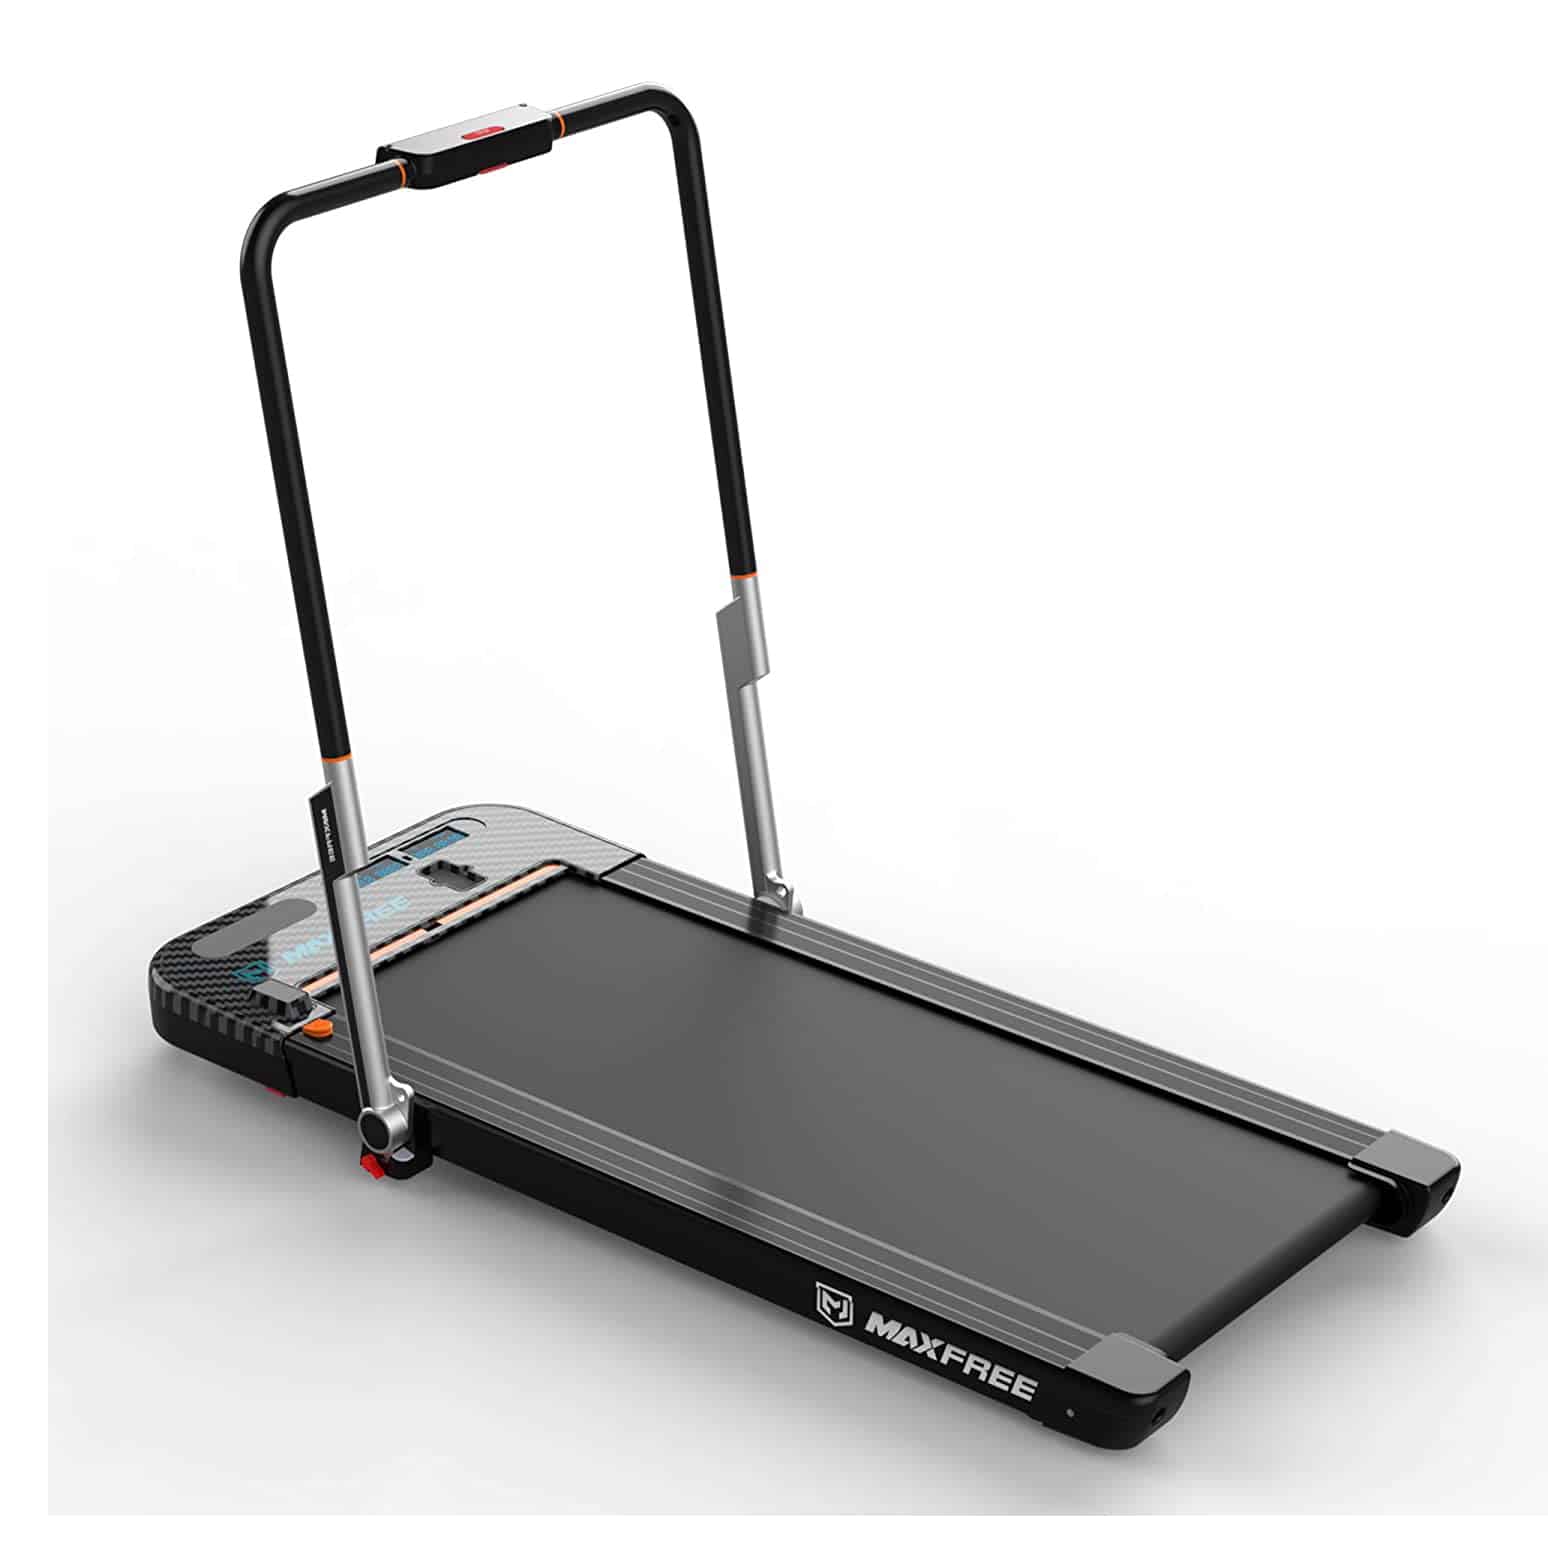 The 10 Best Folding Treadmills in 2021 Reviews Buyer's Guide